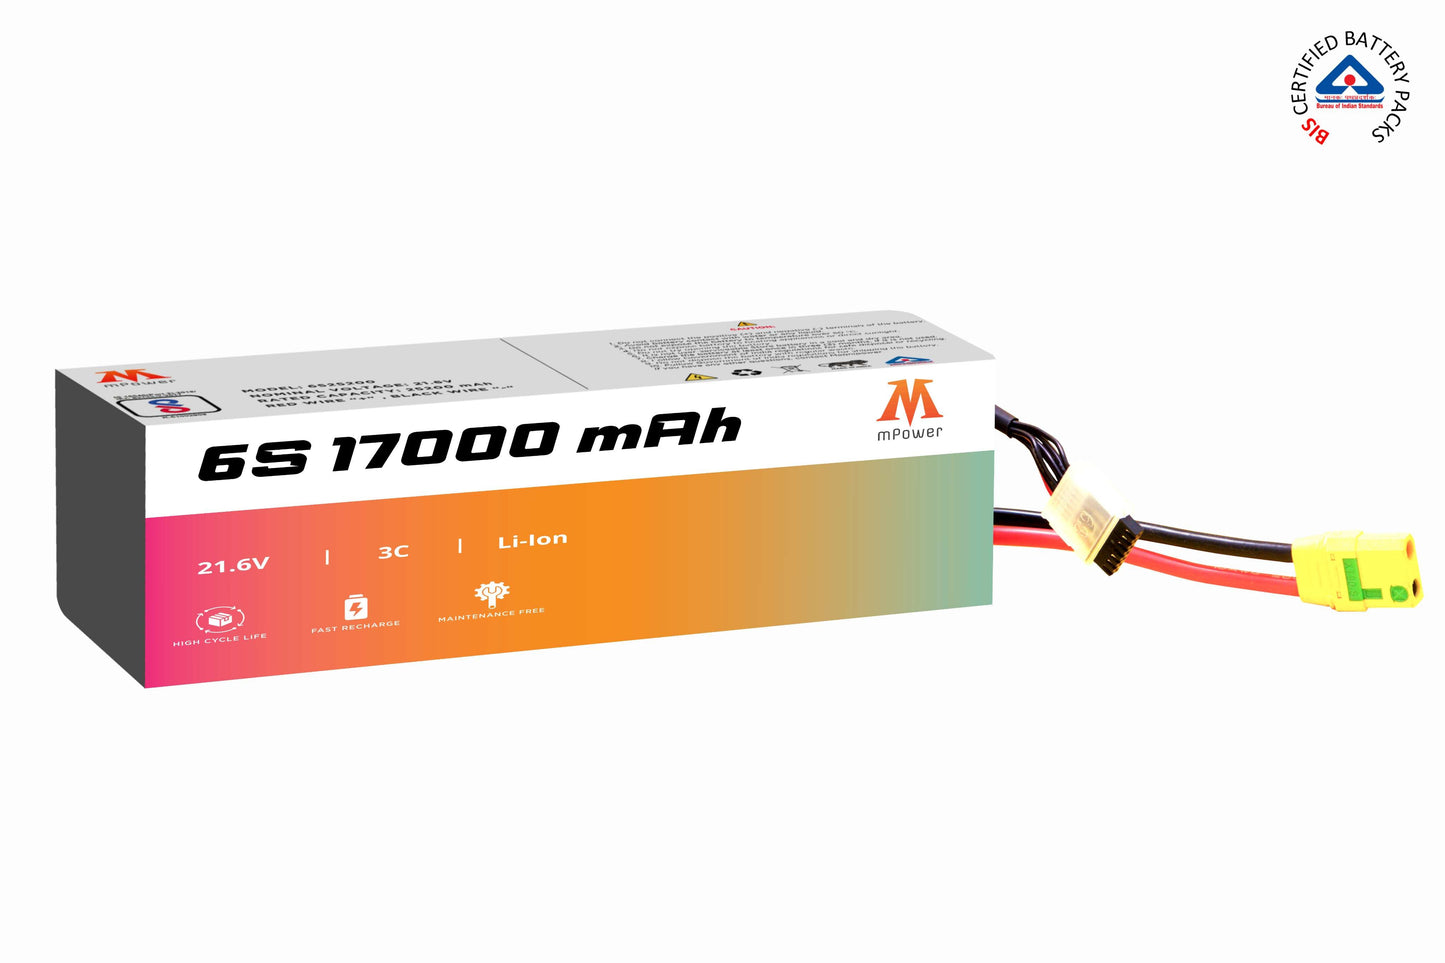 mPower 6S 17000mAh Lithium-Ion Battery for Surveillance Drones